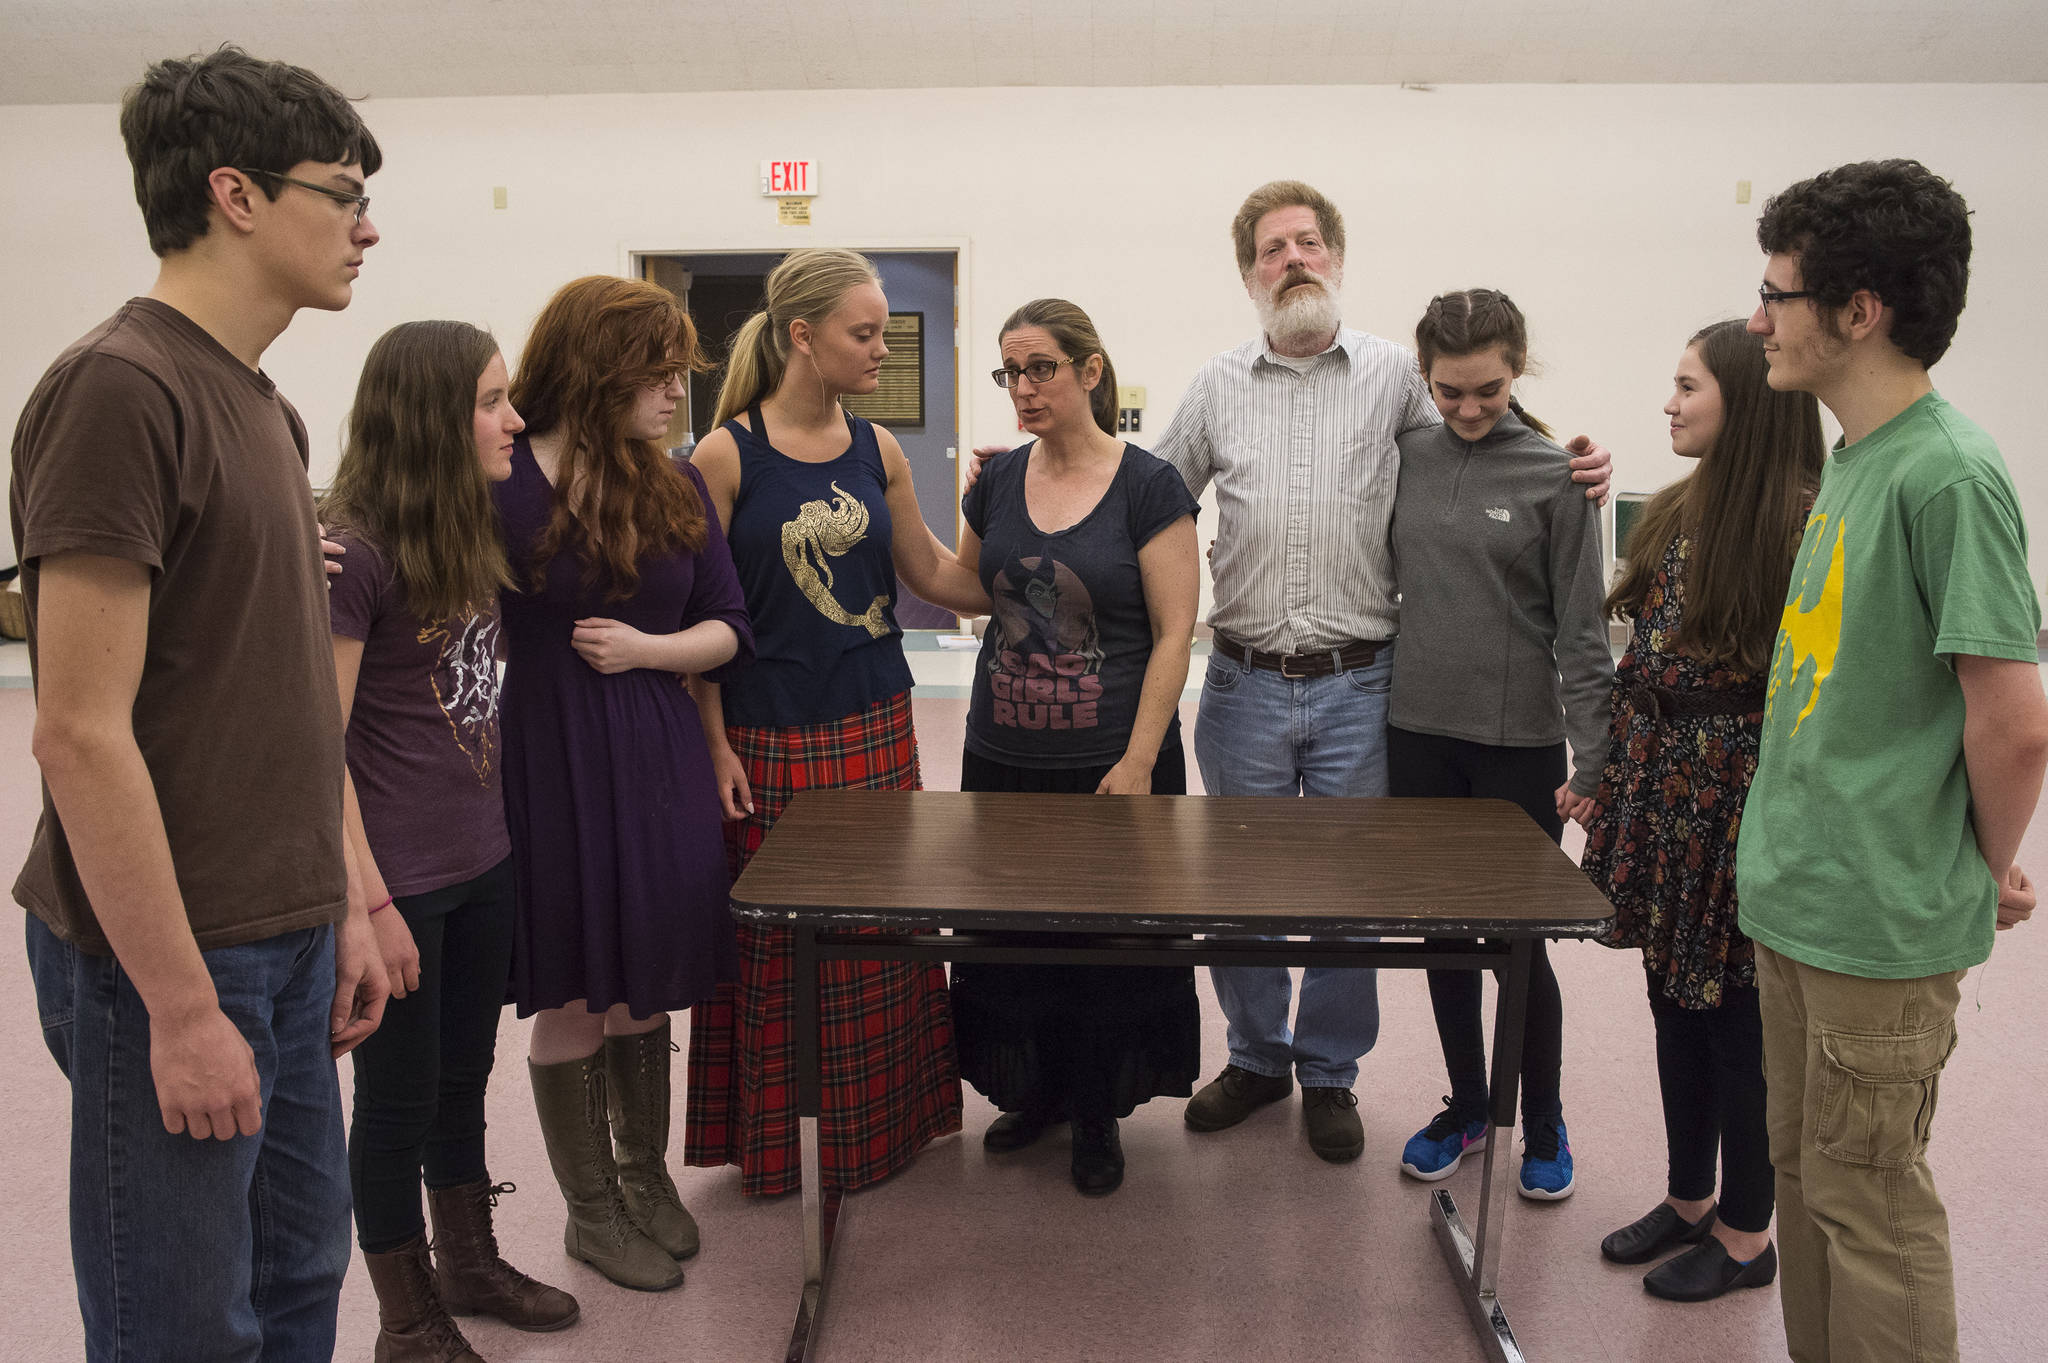 Left to right: James Deats, Erin MacDonald, Ashleigh Watt, Abigail Zahasky, Heather Mitchell, Michael Wittig Sr., Ava Meade, Clare Homan, and Cole Mitchell. Rehearsal of Latitude 58’s production of “Fiddler on the Roof” at St. Ann’s Hall on Thursday, Nov. 9, 2017. (Michael Penn | Capital City Weekly)